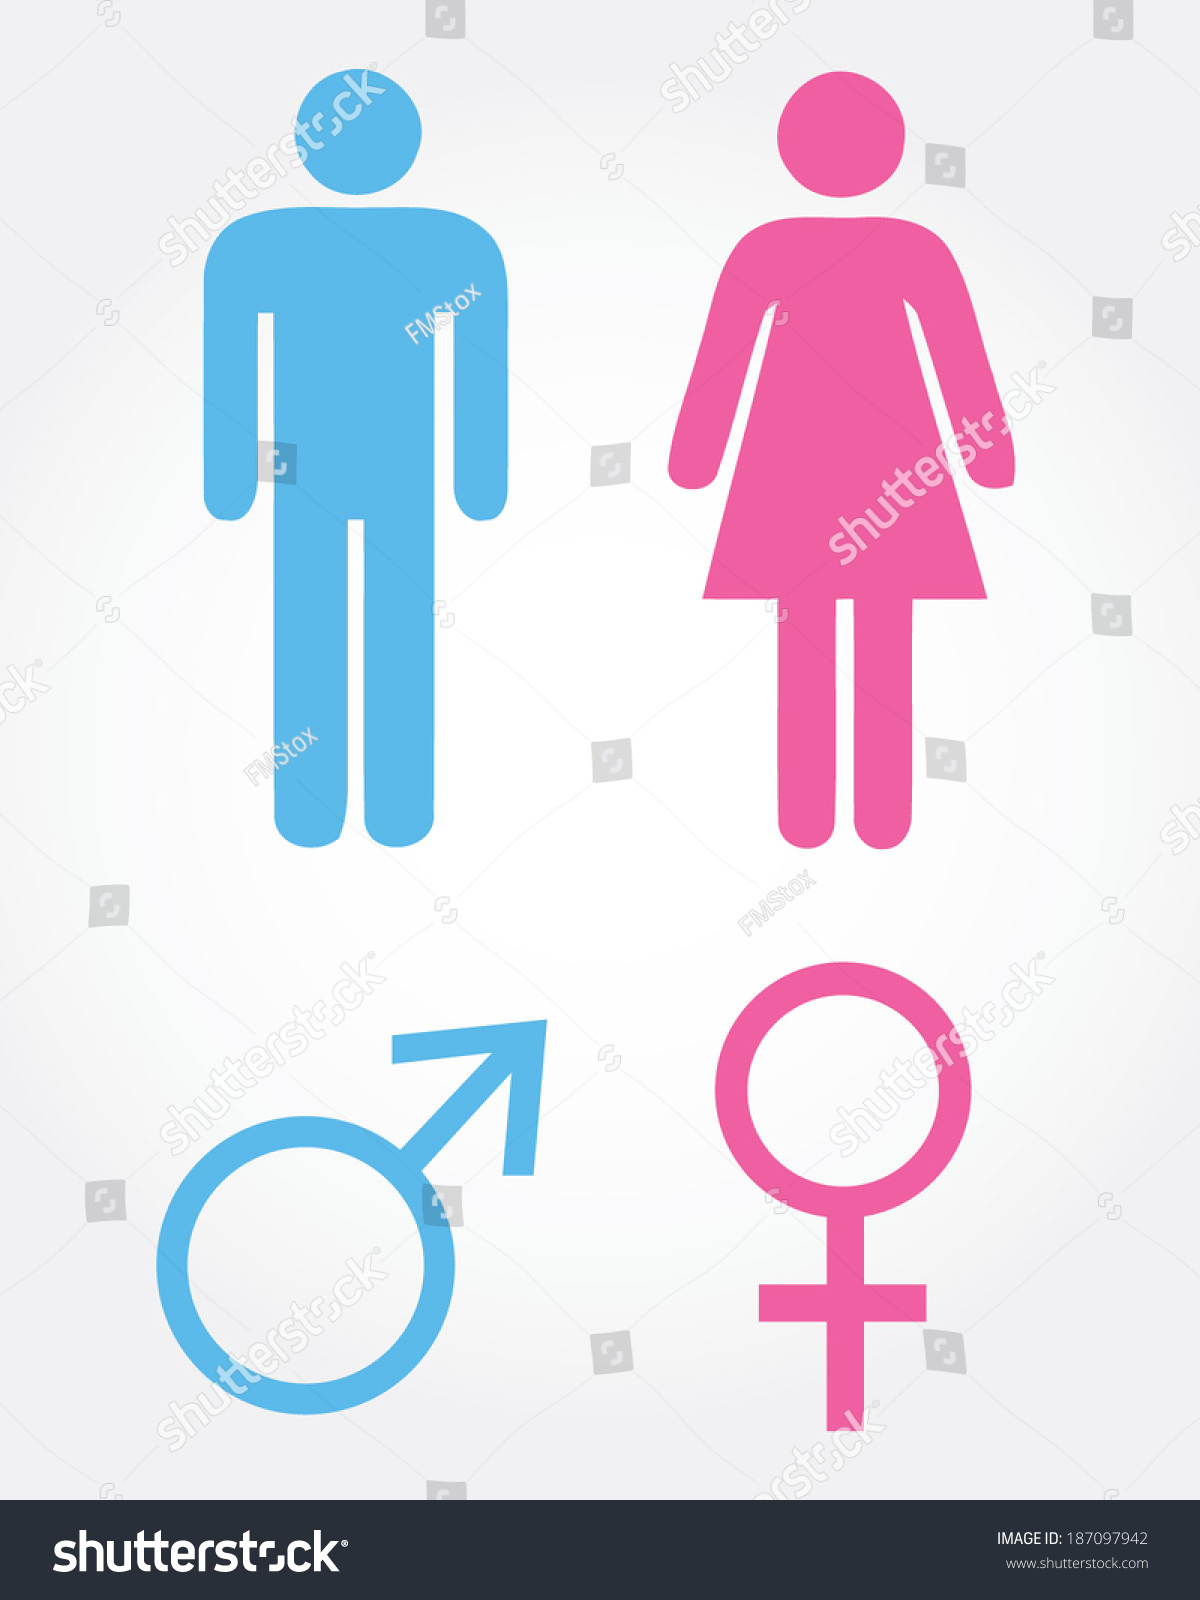 Vector Male And Female Icon Set - 187097942 : Shutterstock